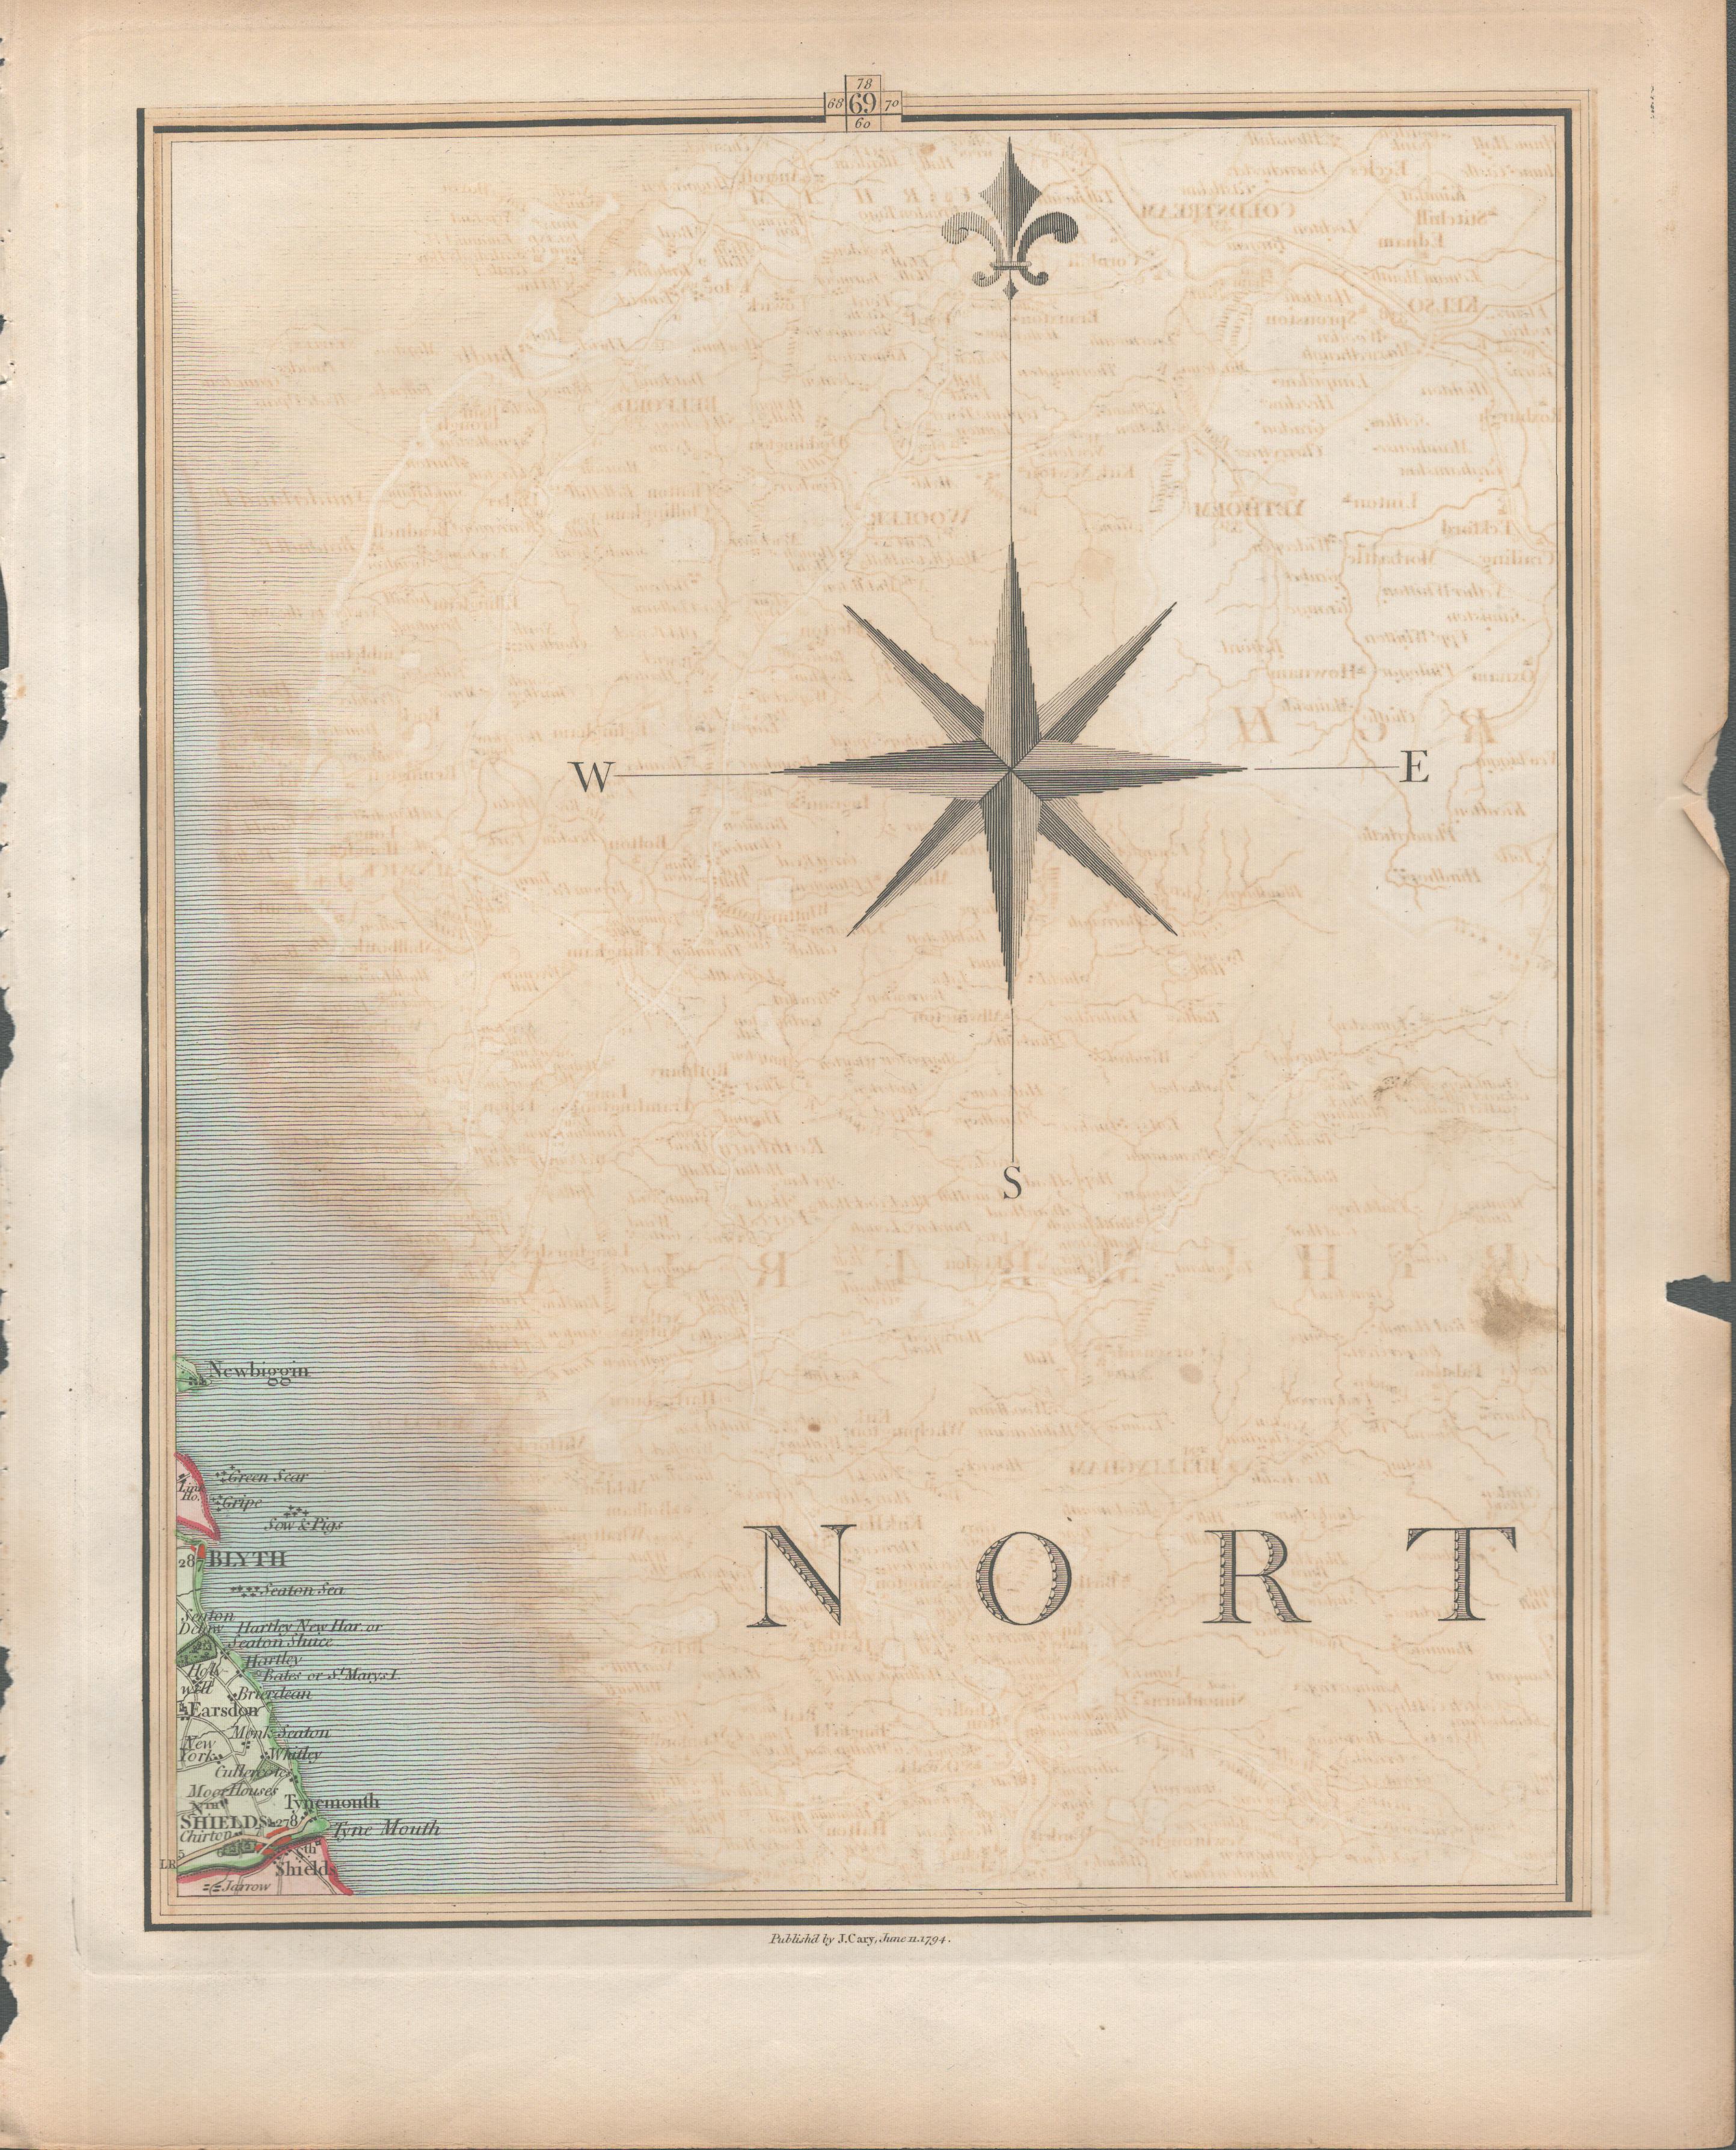 Northumbria South Shields Whitley Bay Blyth - John Cary’s Antique 1794 Map.